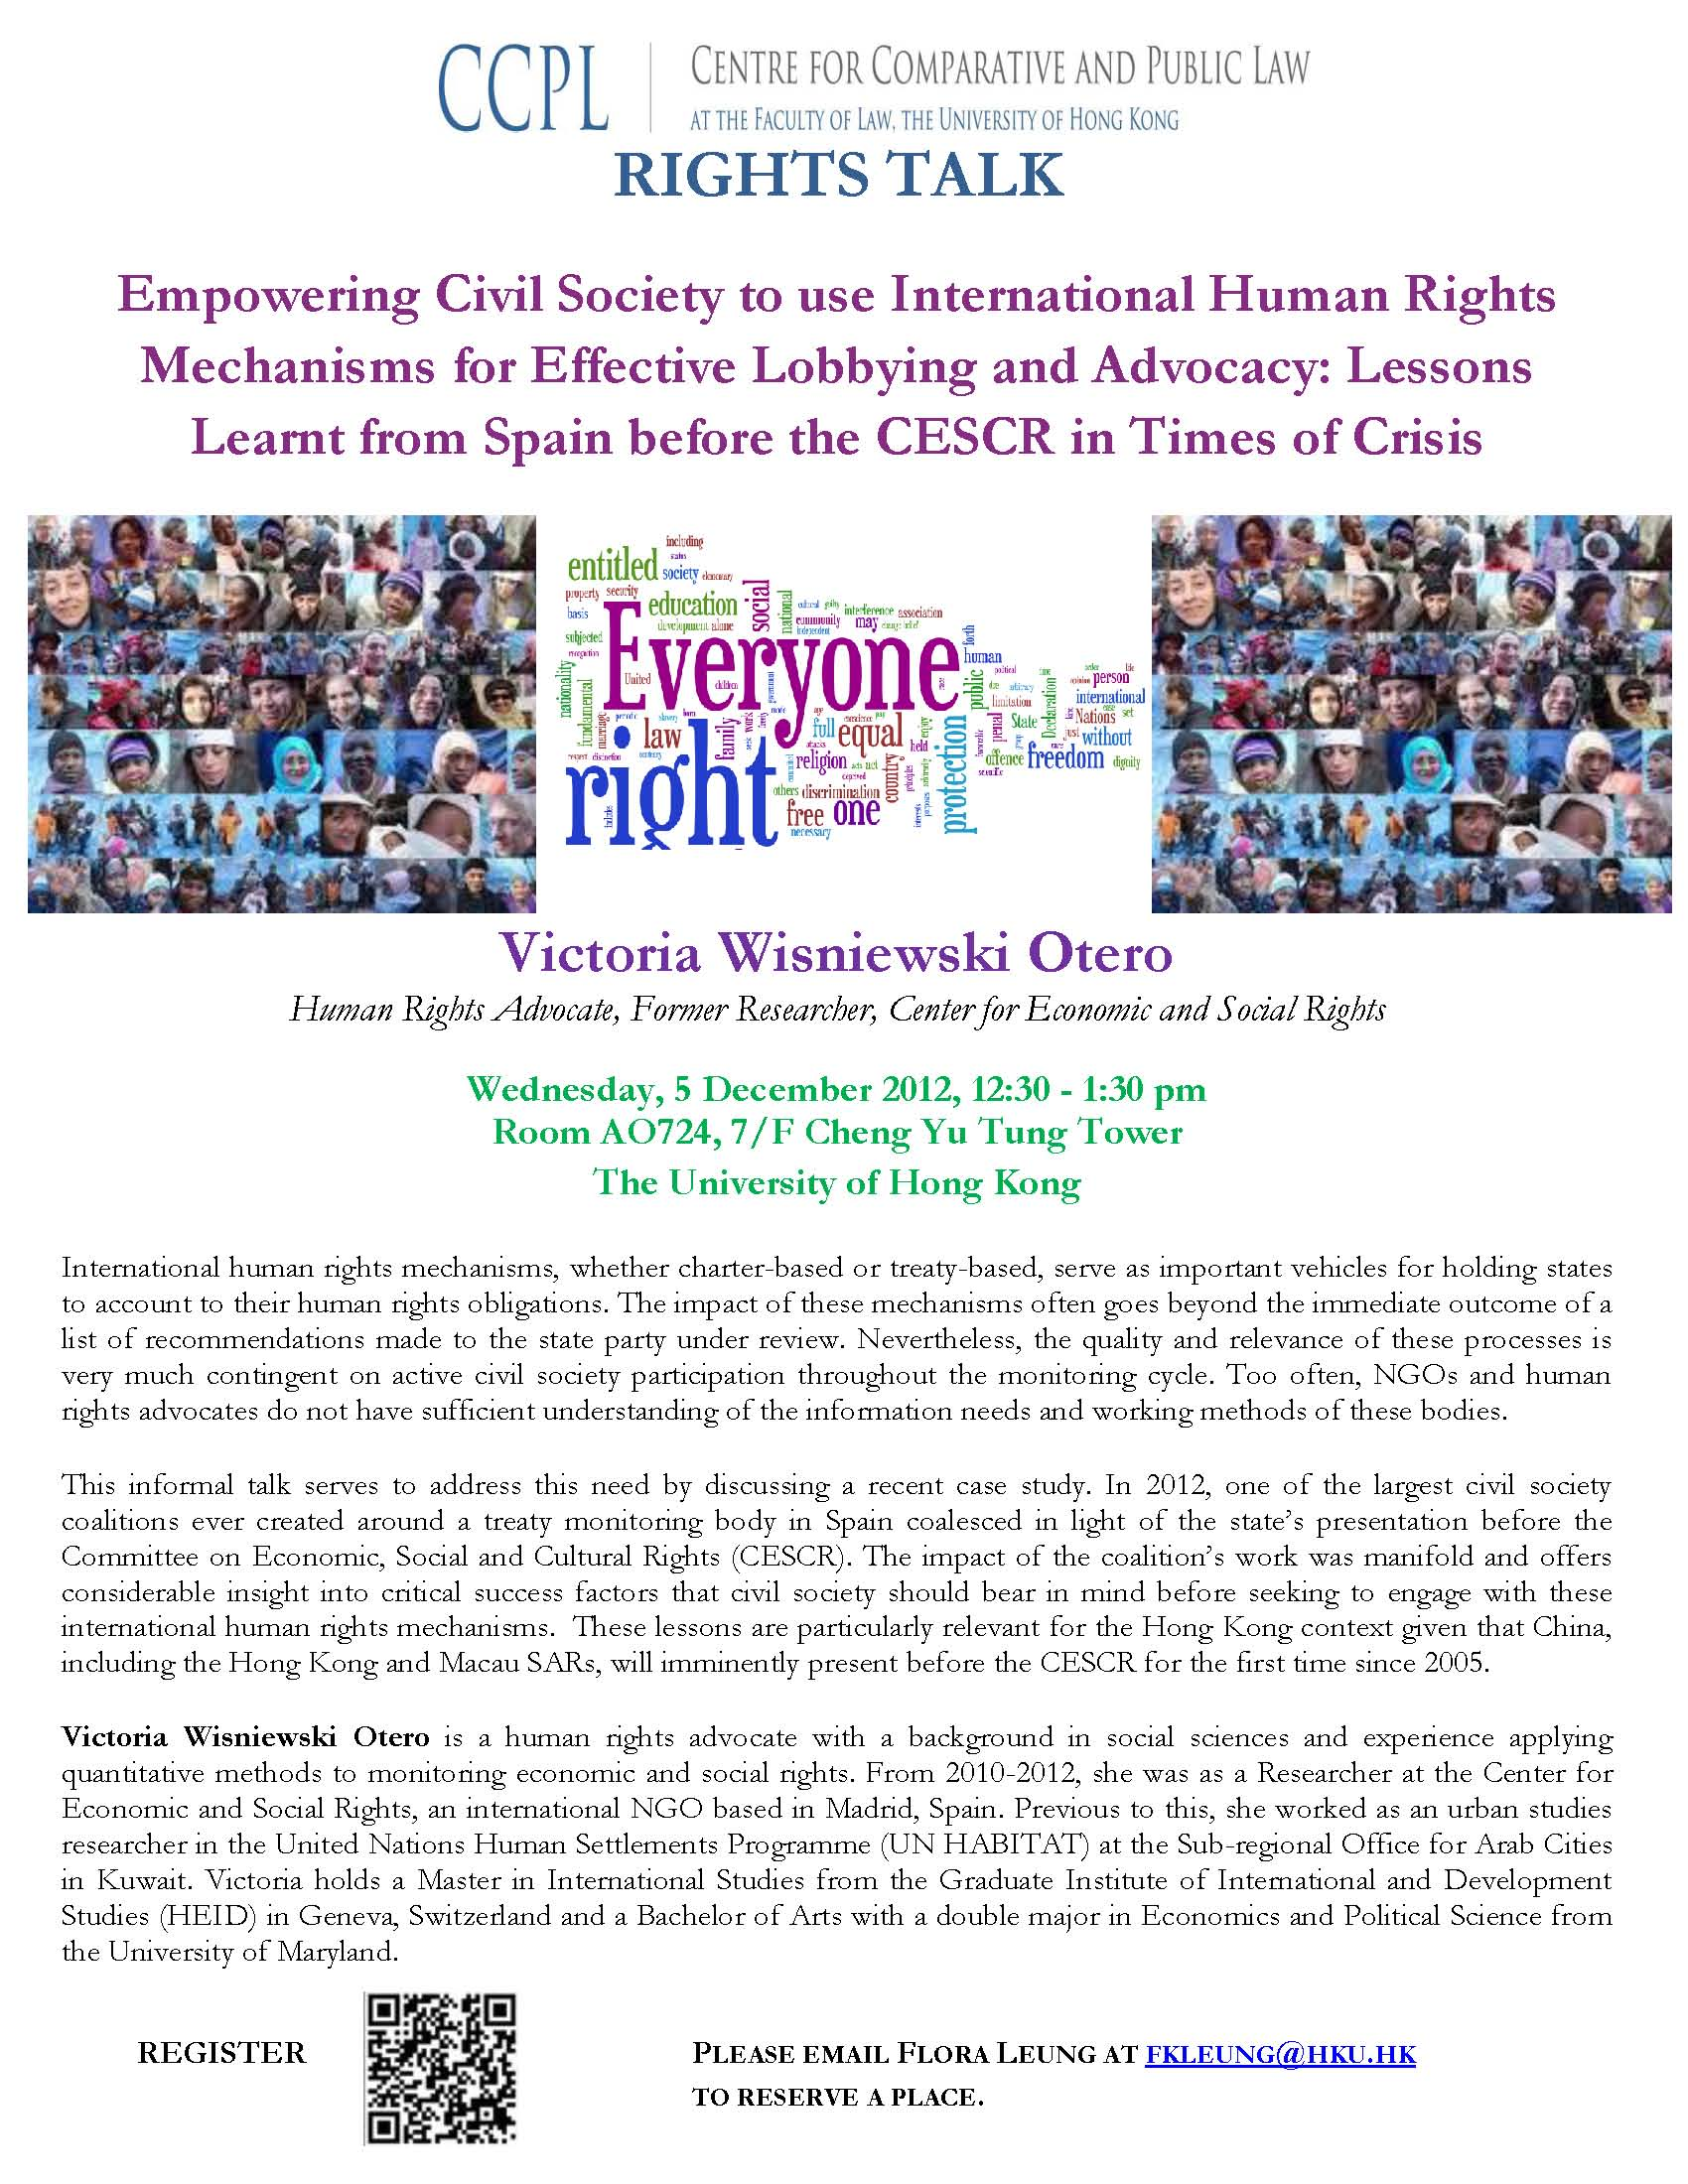 Empowering Civil Society to use International Human Rights Mechanisms for Effective Lobbying and Advocacy: Lessons Learnt from Spain before the CESCR in Times of Crisis